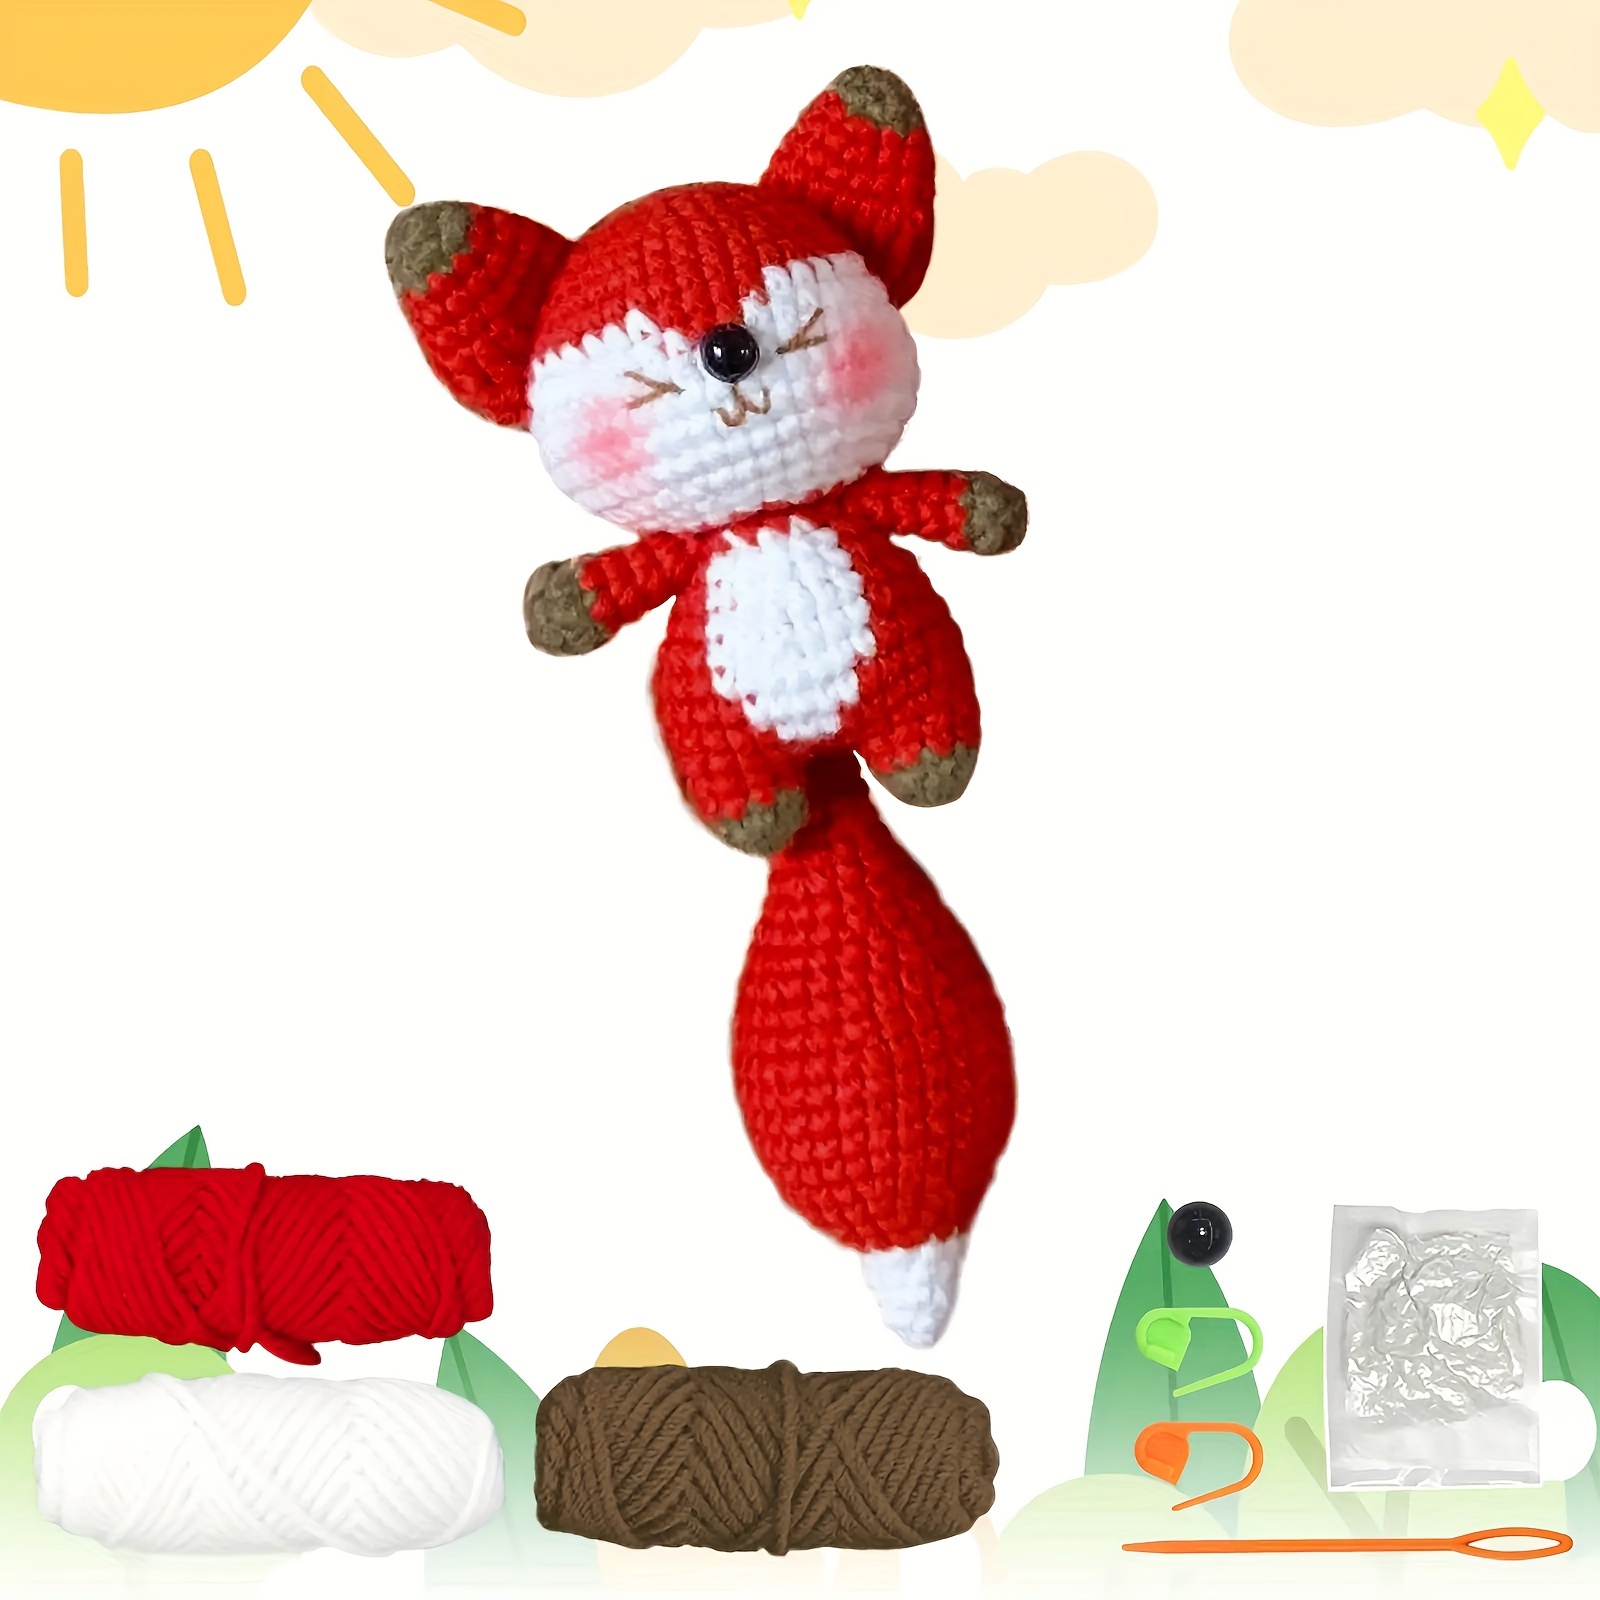 

crafty Gift" Complete Red Fox Crochet Kit For Beginners - All-in-one Starter Set With Instructions & Step-by-step Video Tutorials, Fabric Material Included